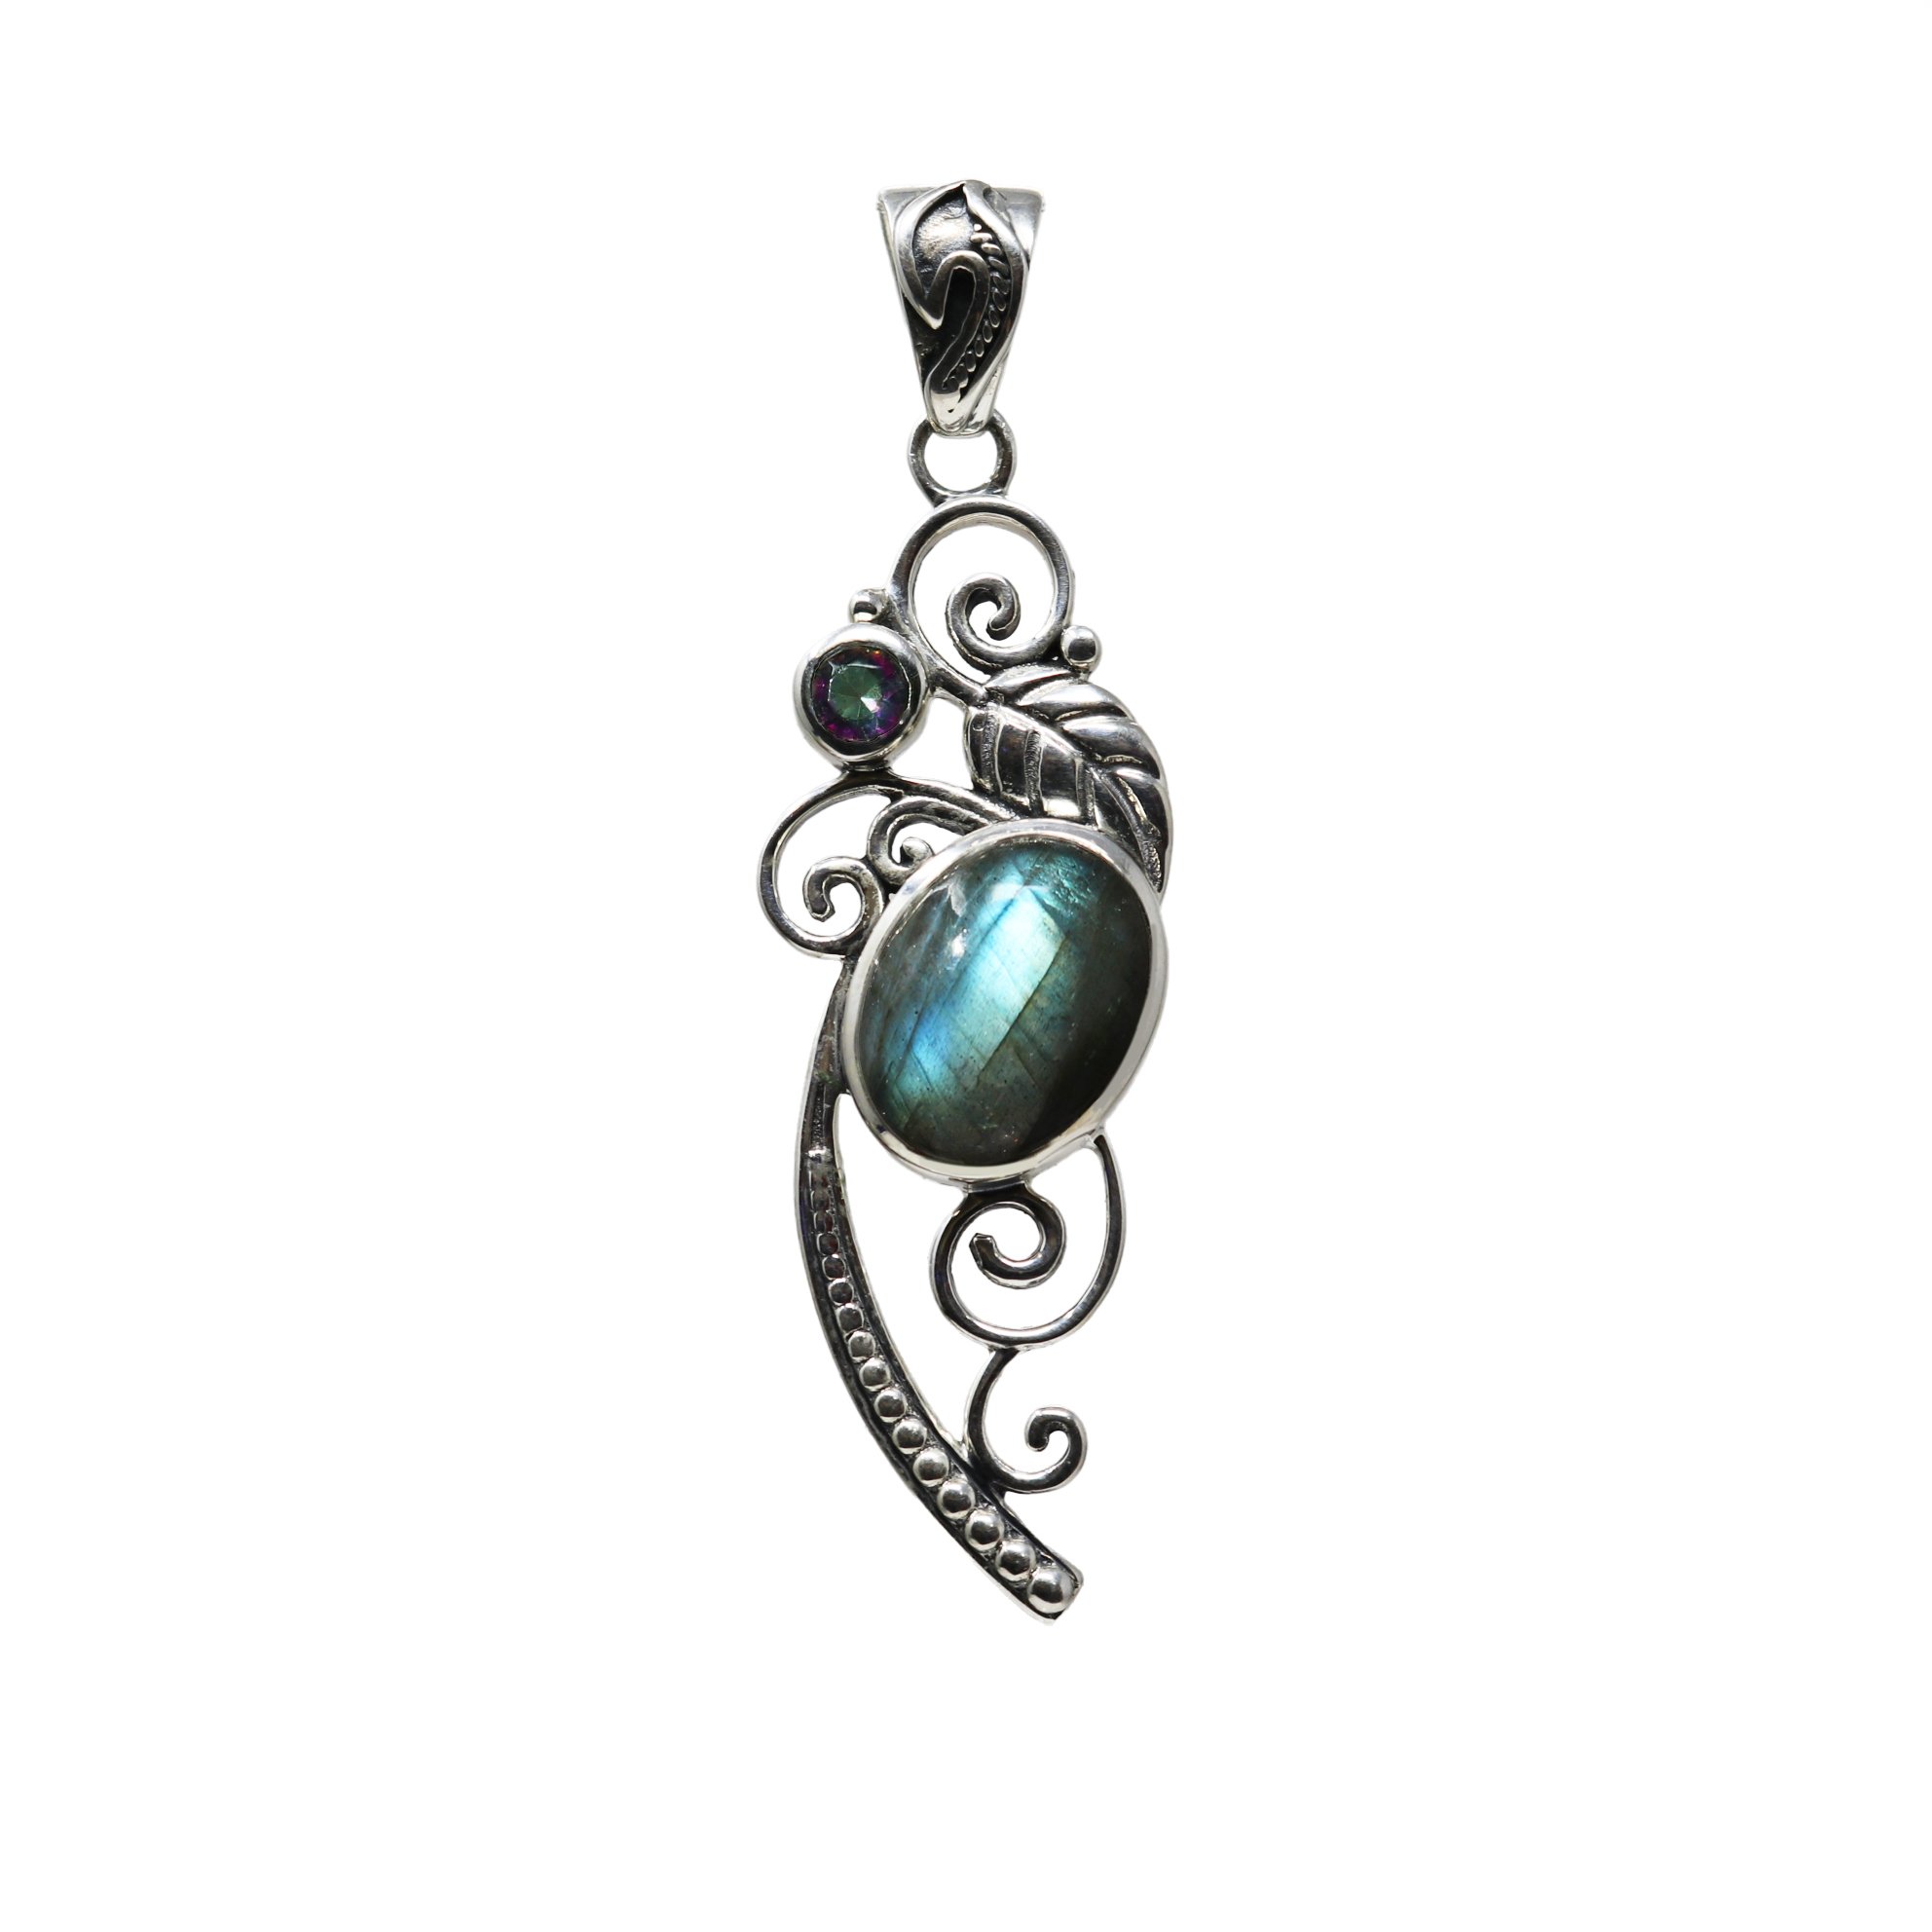 Labradorite Pendant - Oval Cabochon With Faceted Mystic Topaz Round On Ornate 925 Sterling Silver Setting With Swirls & Leaf Detail & Cascading Beaded Section - Ornate Bail